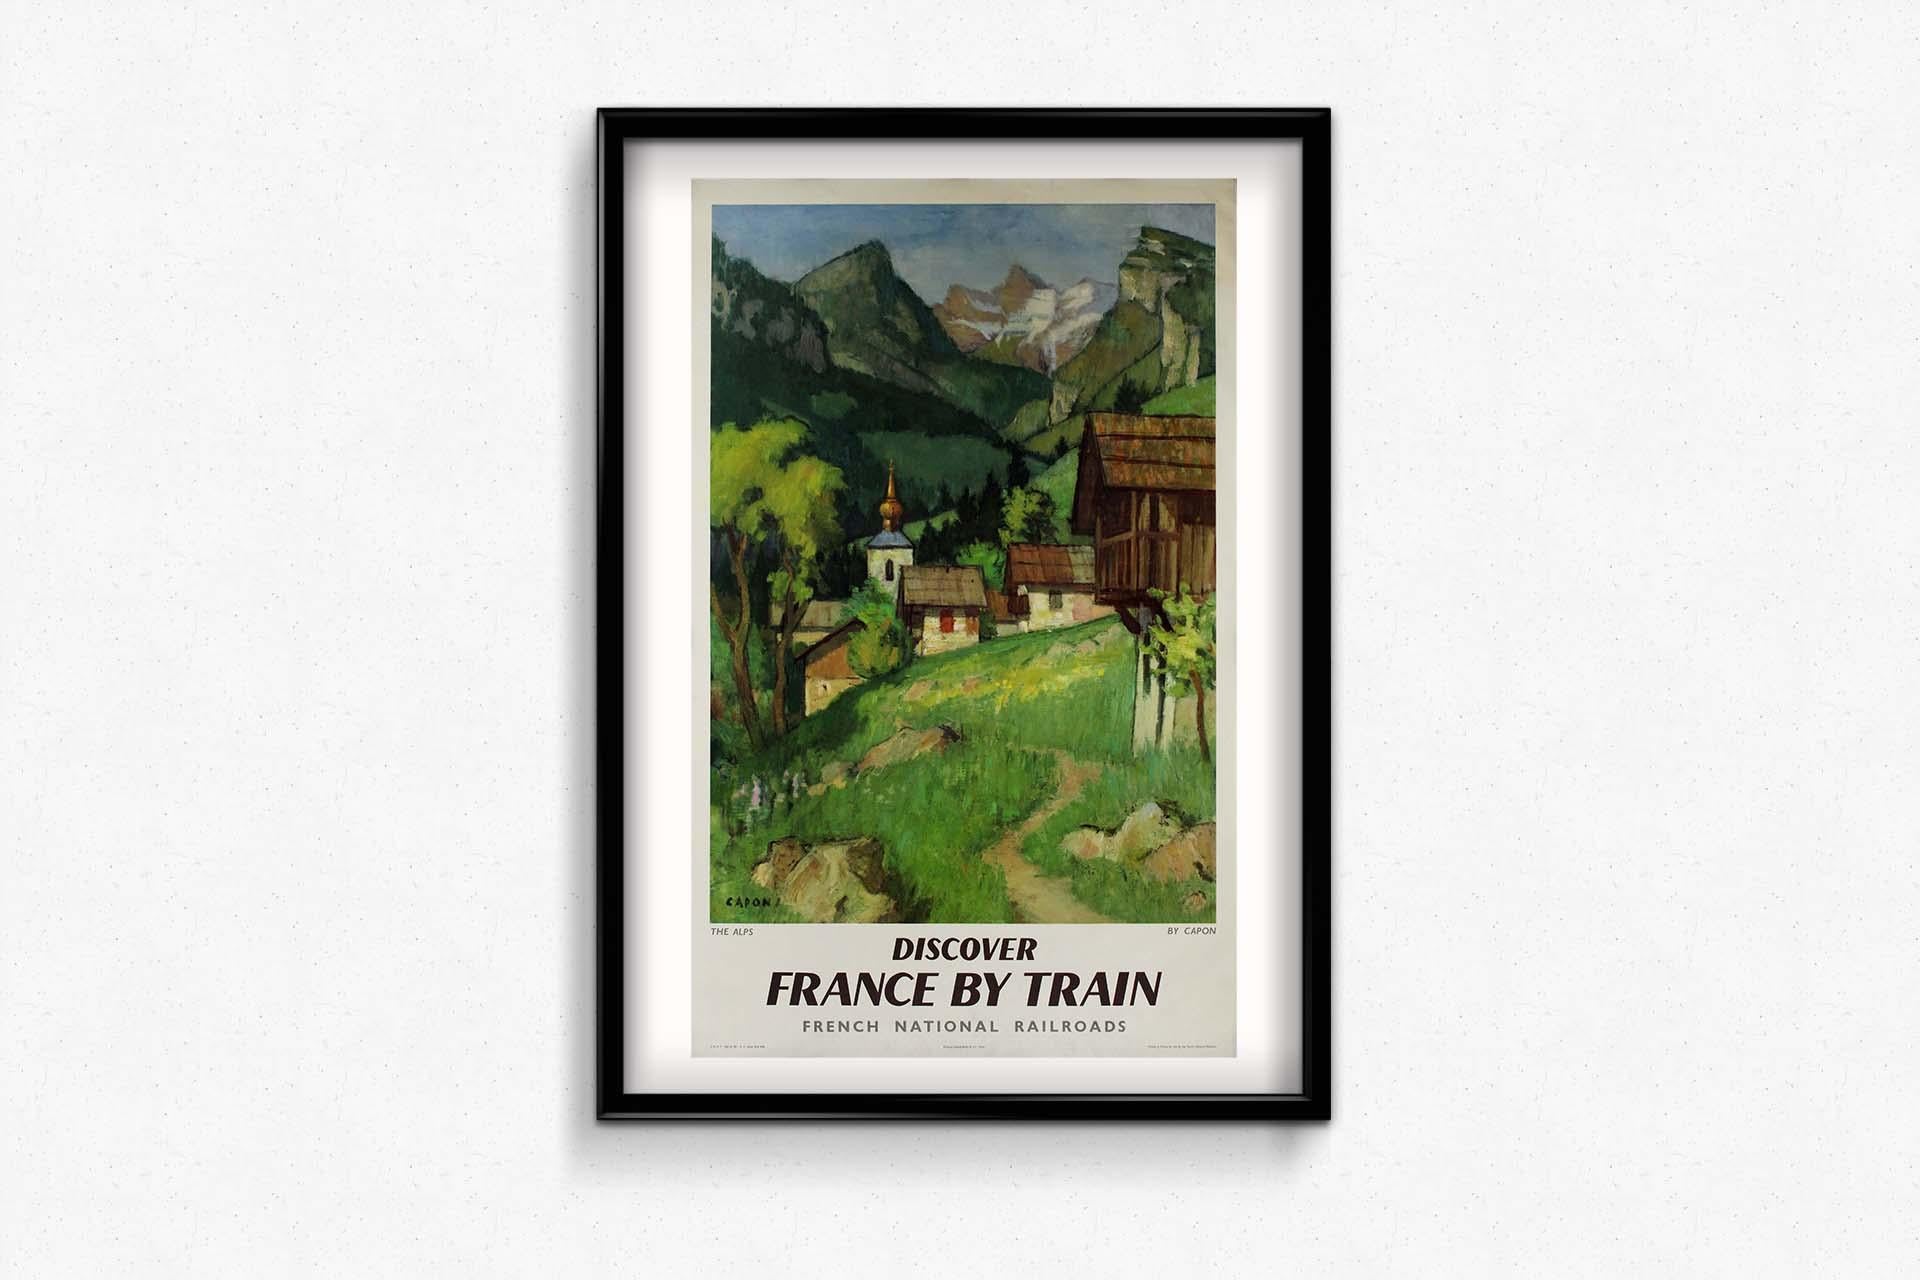 The 1956 original travel poster by Capon titled 